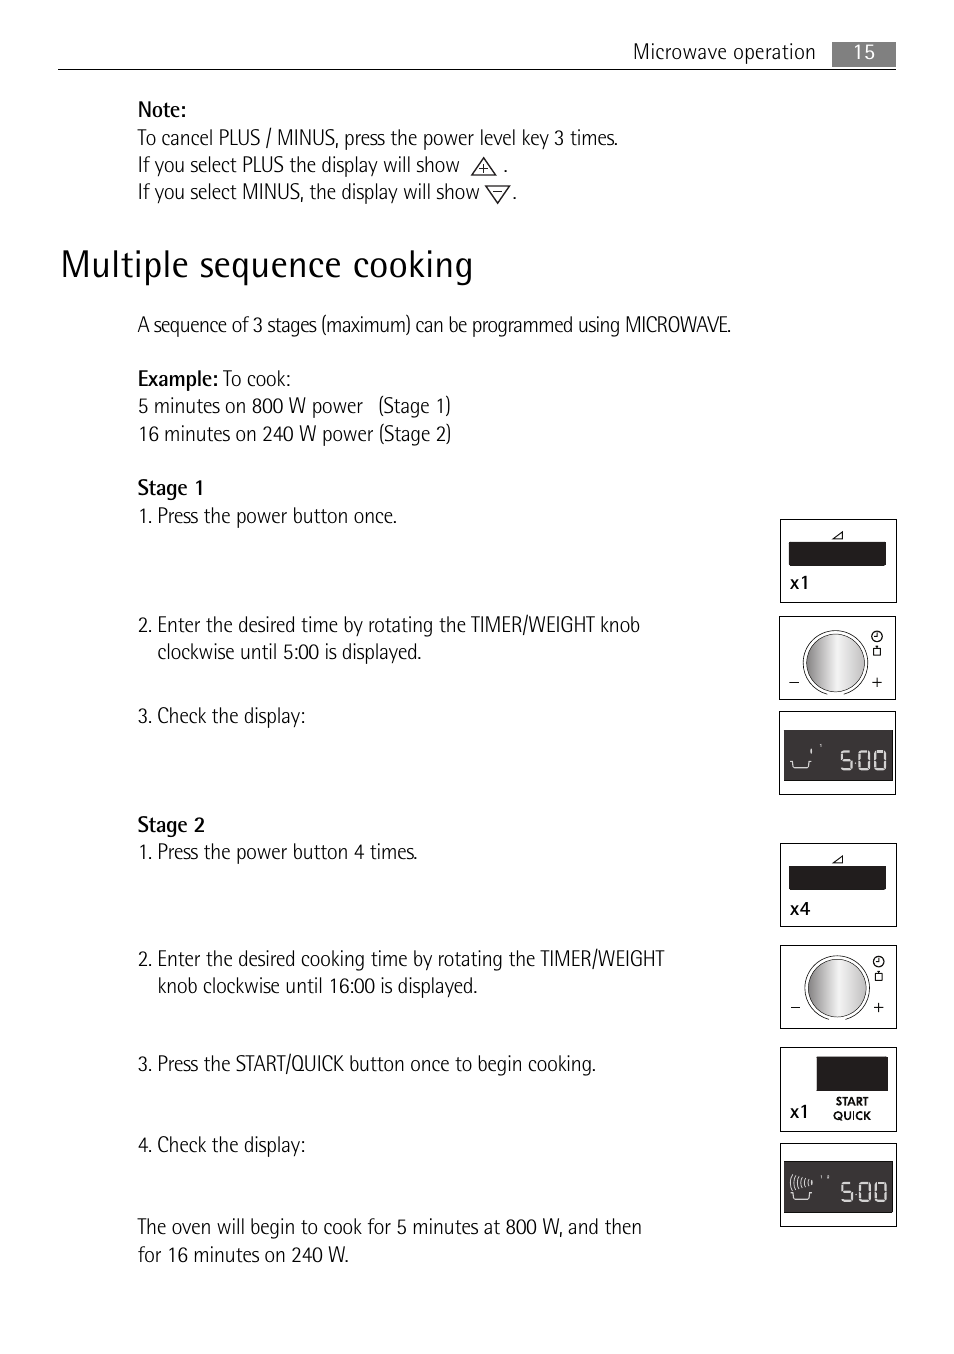 Multiple sequence cooking, X1 x4 x1 | AEG MC2664E-W User Manual | Page 15 / 36